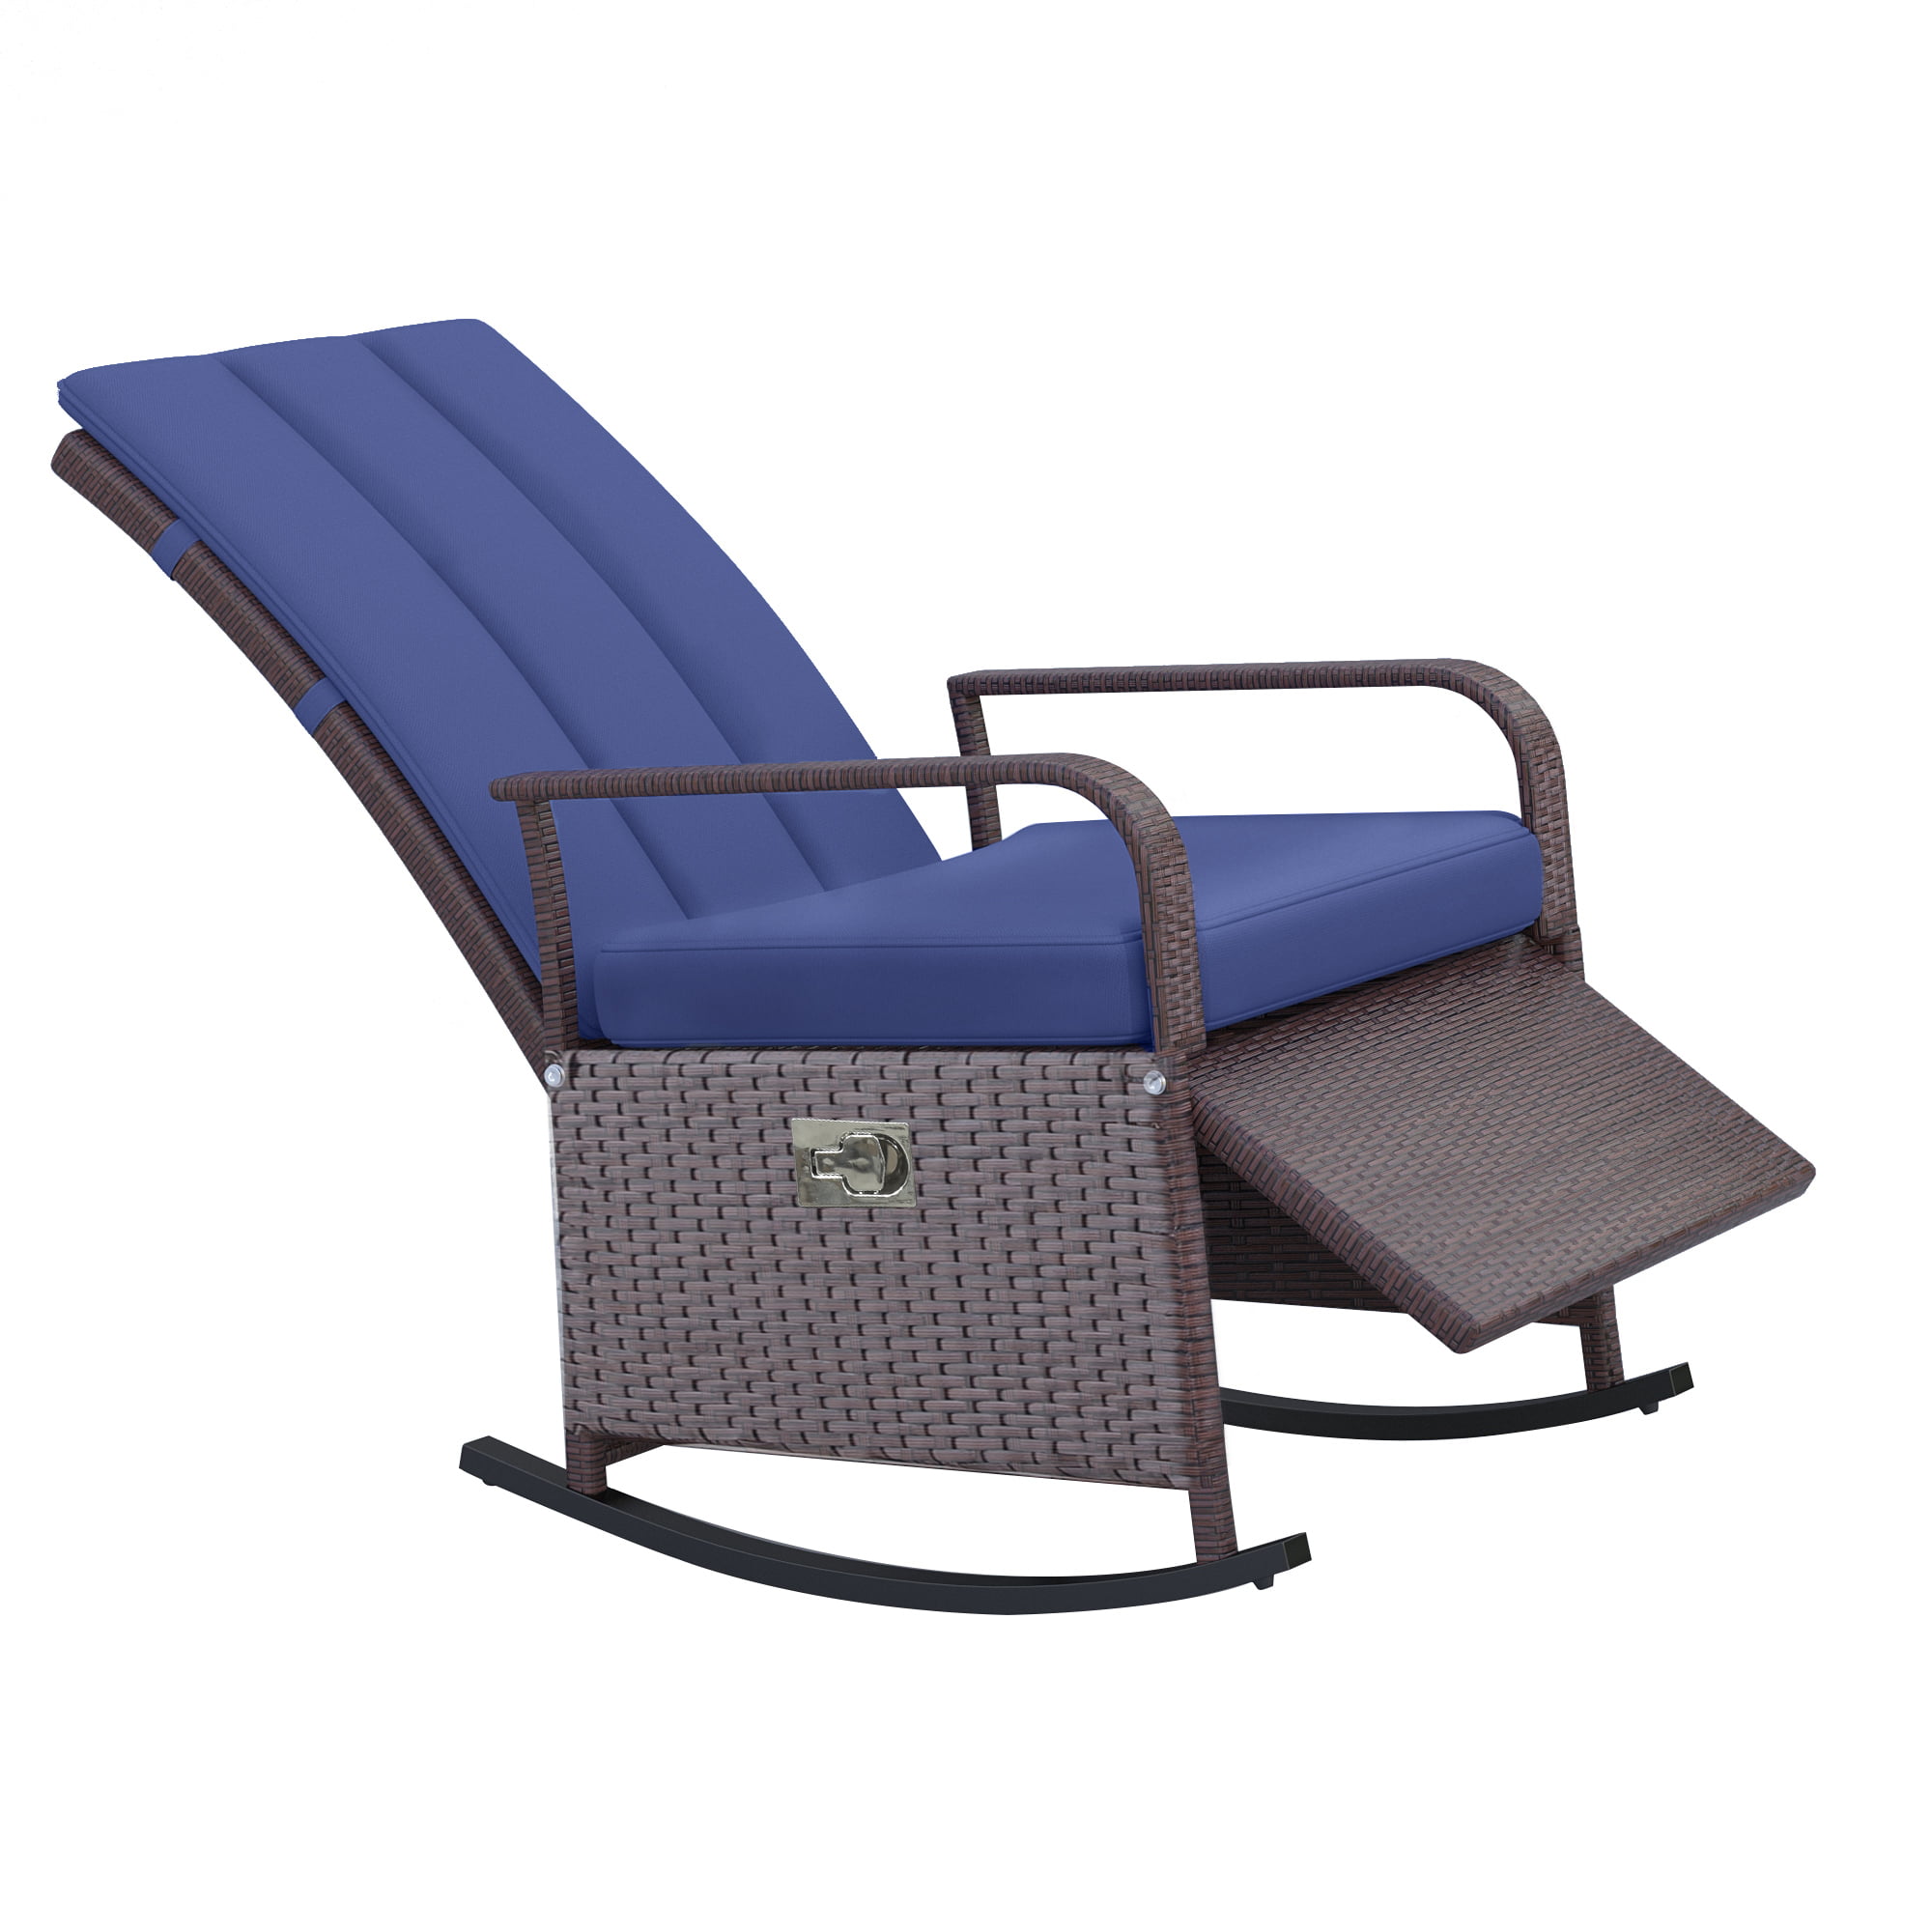 Outsunny Outdoor Rattan Recliner, Outsunny Outdoor Rattan Recliner Chair With Cushion